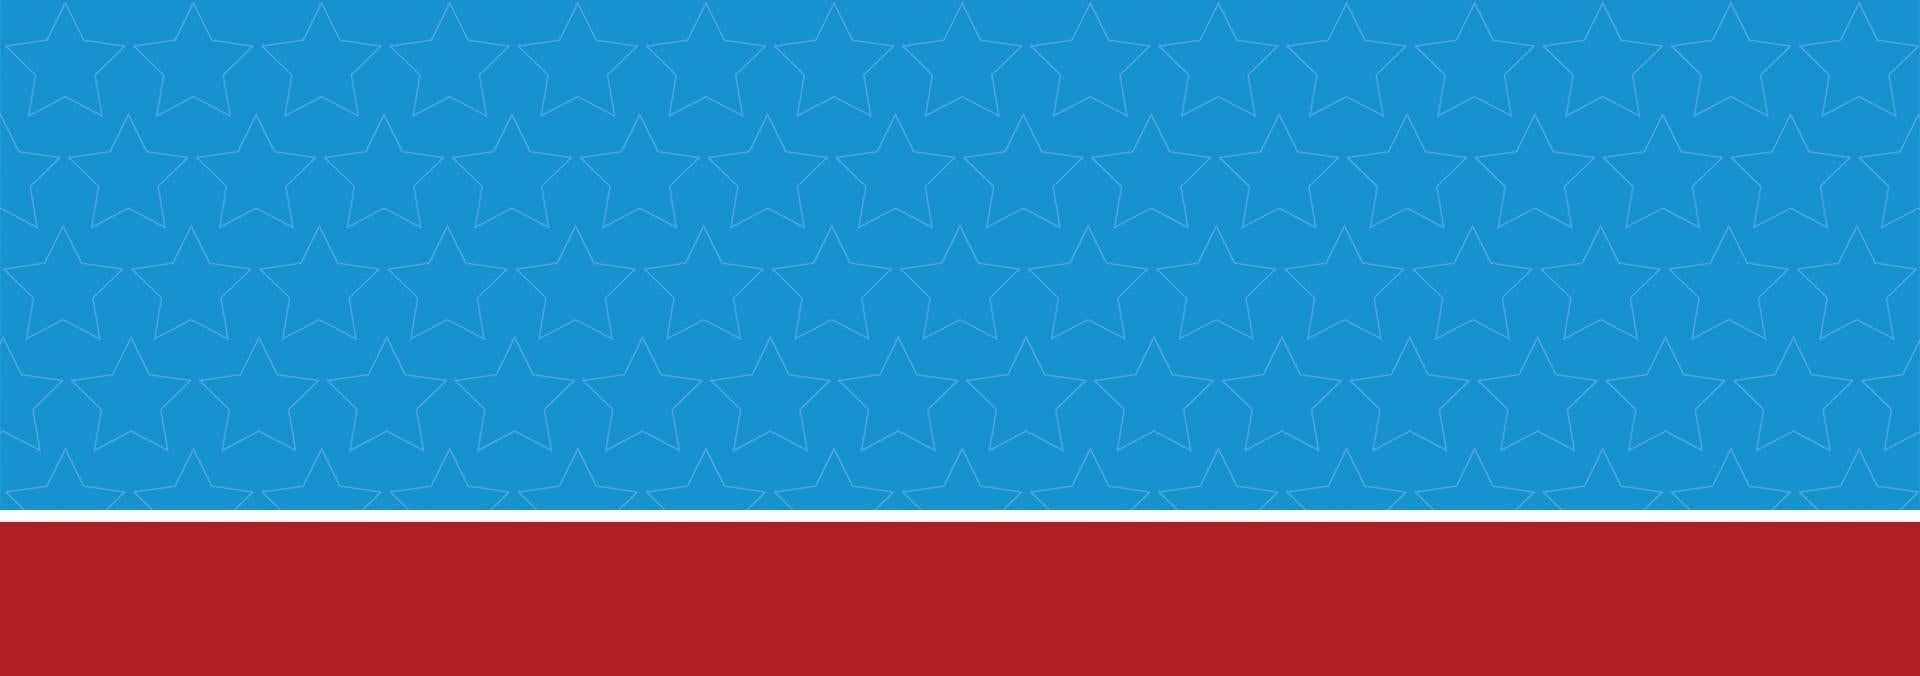 Red, white and blue graphic with stars